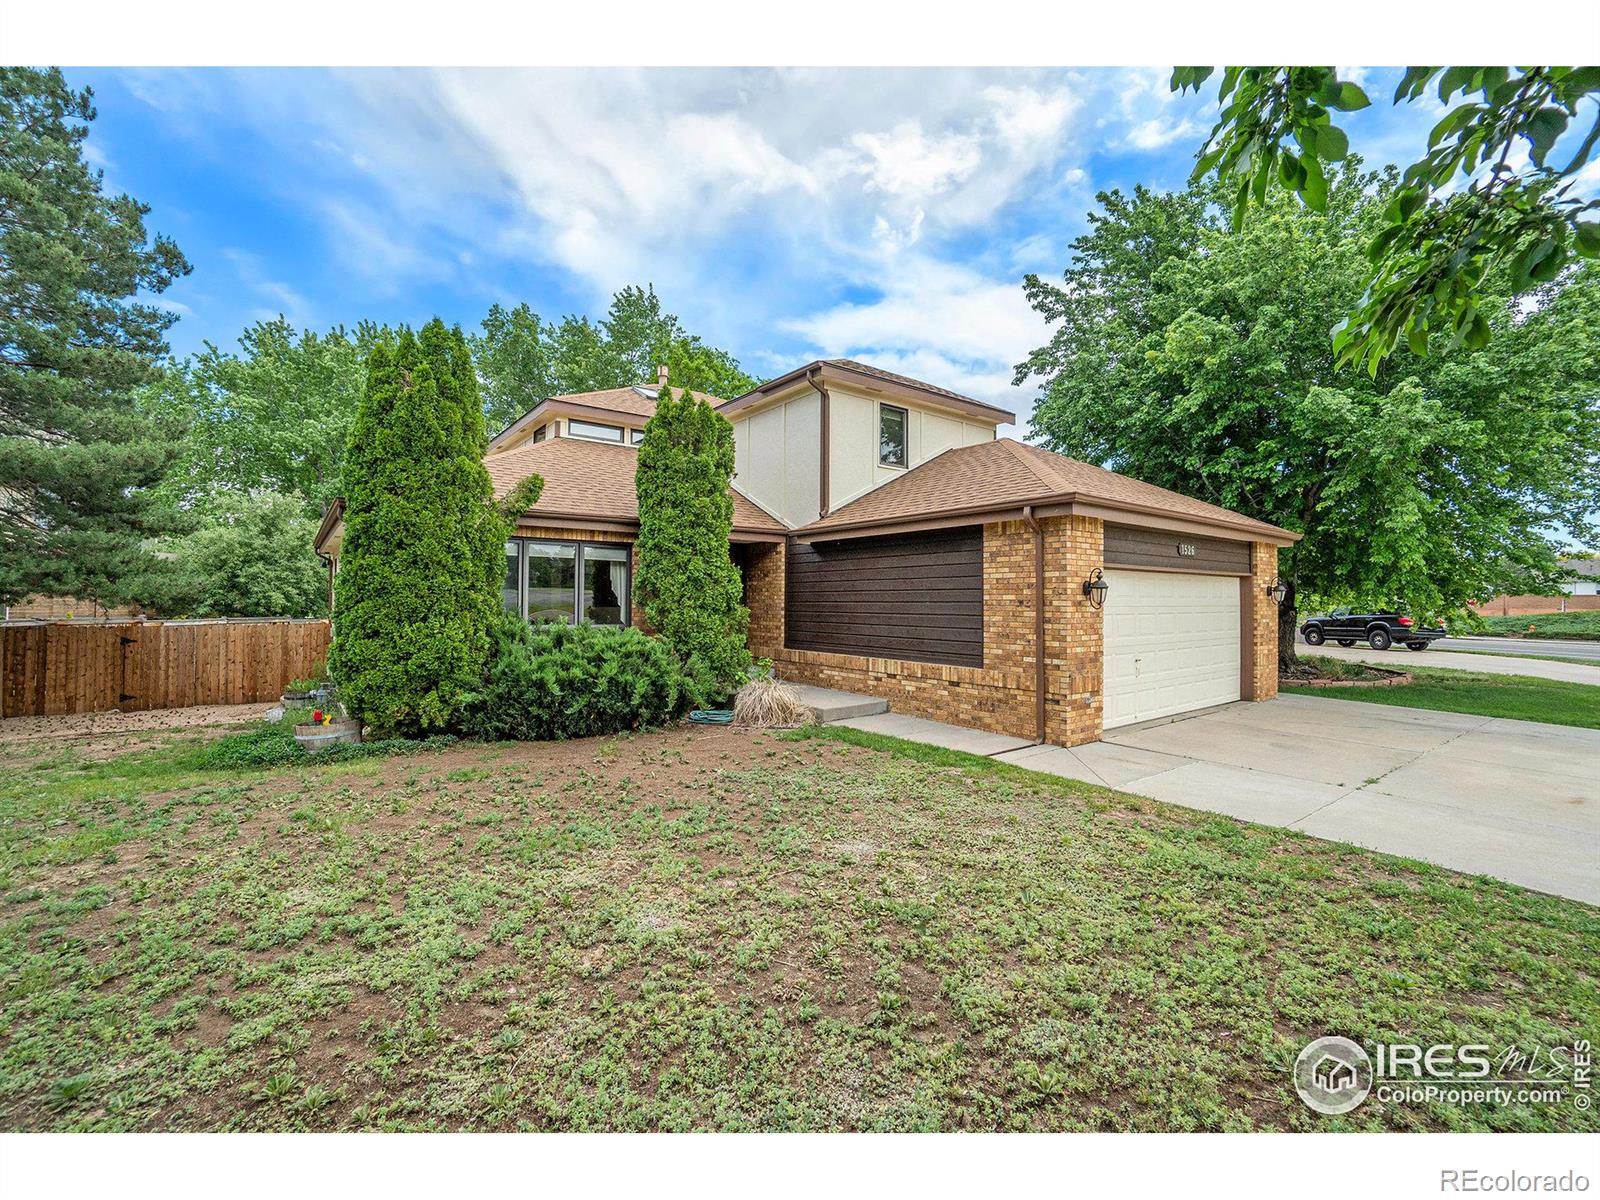 1526  43rd Avenue, greeley MLS: 4567891010711 Beds: 6 Baths: 4 Price: $585,000